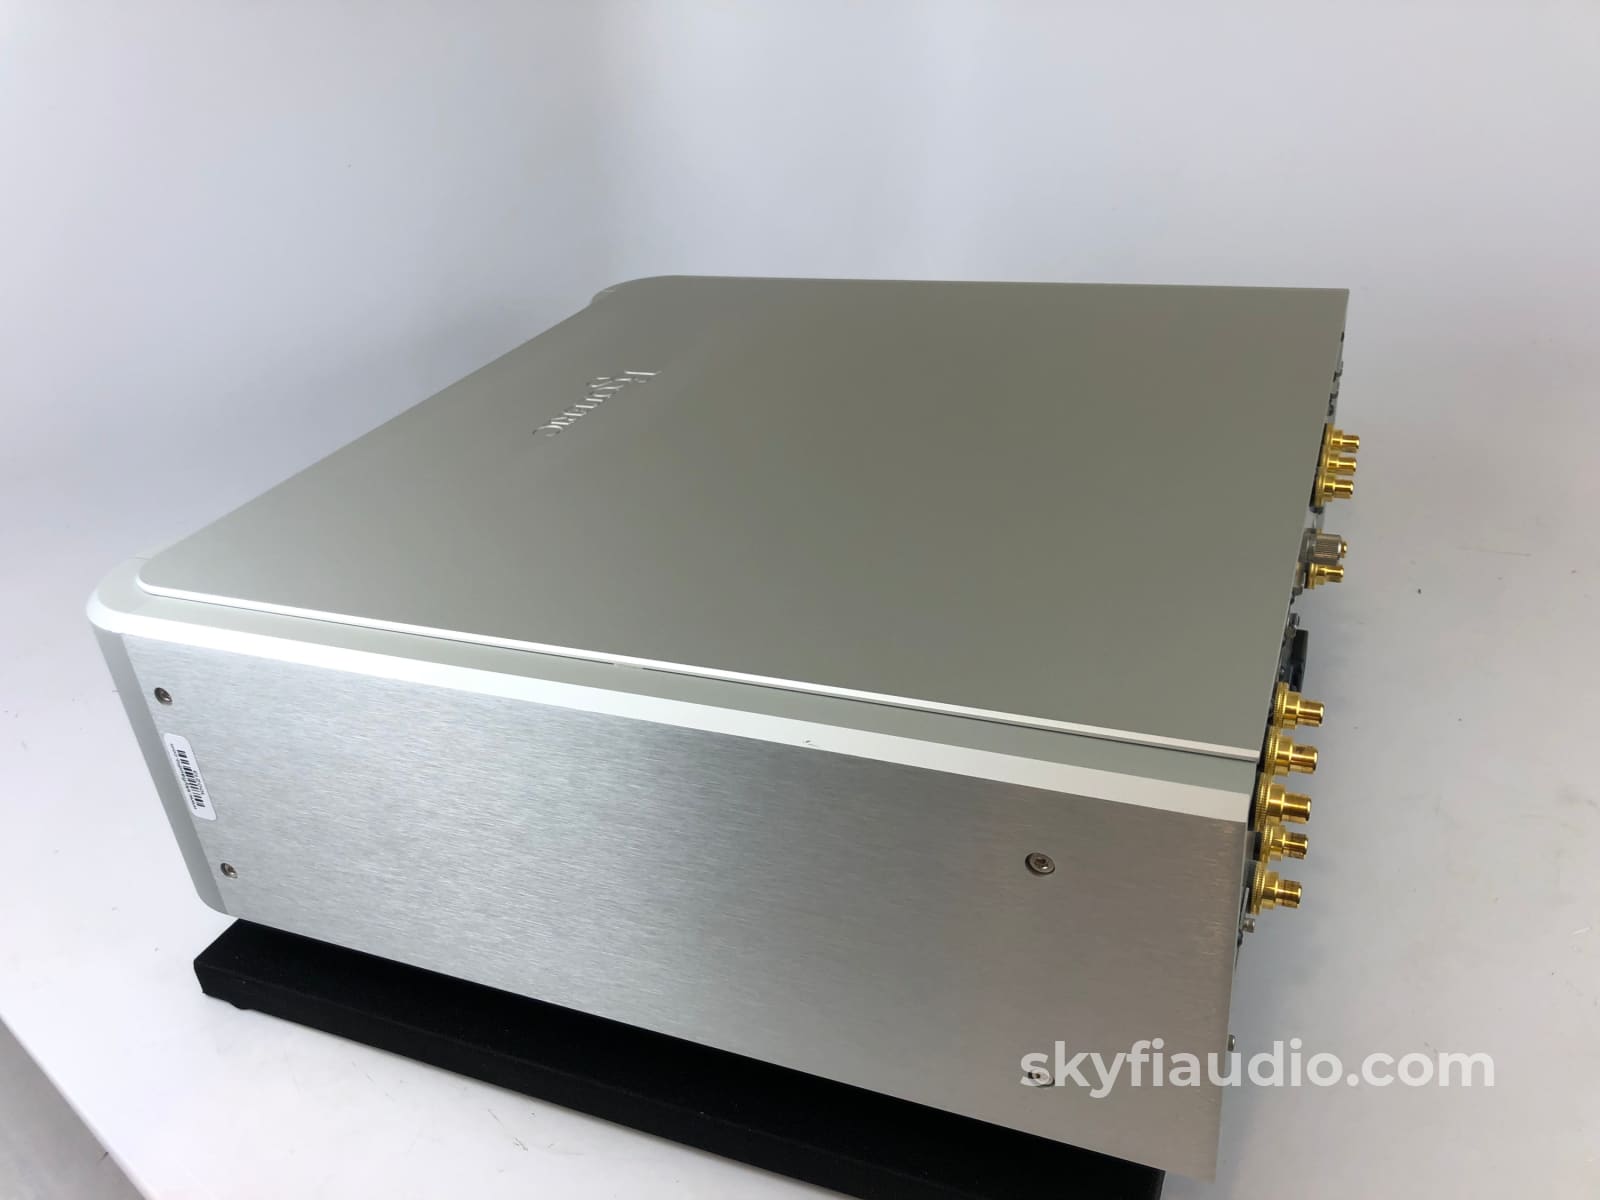 Esoteric C-02 Flagship Preamplifier Complete Set And Mint! $25K Msrp